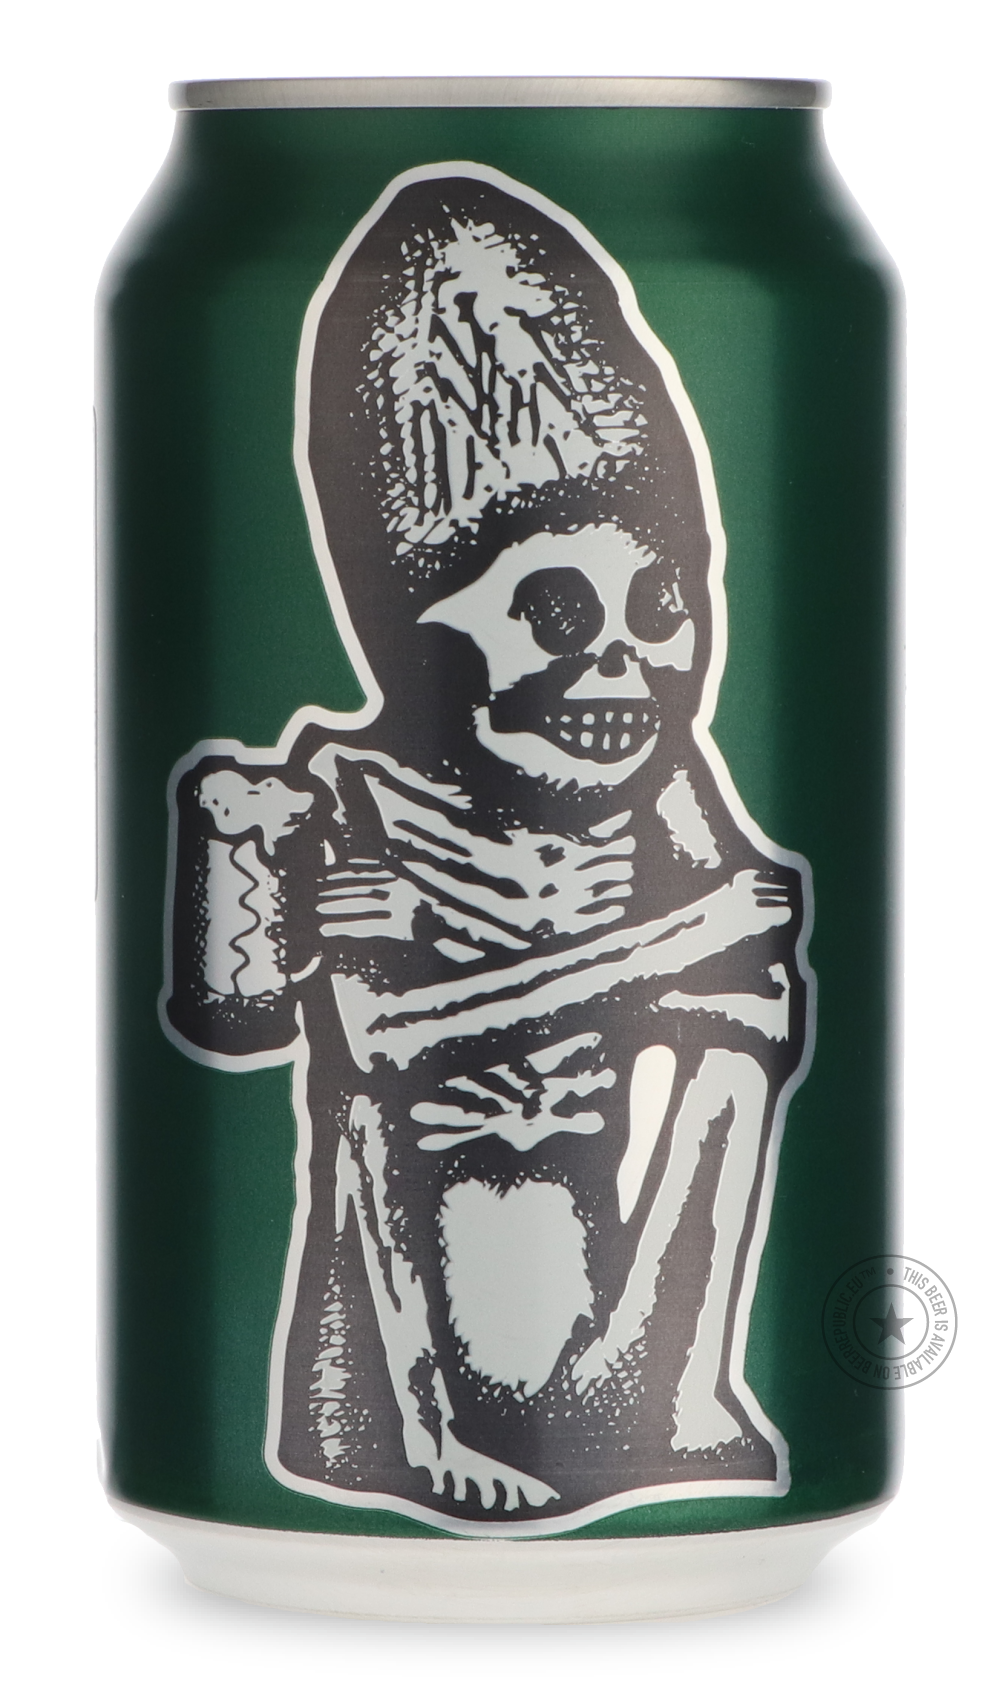 -Rogue- Dead Guy IPA-IPA- Only @ Beer Republic - The best online beer store for American & Canadian craft beer - Buy beer online from the USA and Canada - Bier online kopen - Amerikaans bier kopen - Craft beer store - Craft beer kopen - Amerikanisch bier kaufen - Bier online kaufen - Acheter biere online - IPA - Stout - Porter - New England IPA - Hazy IPA - Imperial Stout - Barrel Aged - Barrel Aged Imperial Stout - Brown - Dark beer - Blond - Blonde - Pilsner - Lager - Wheat - Weizen - Amber - Barley Wine 